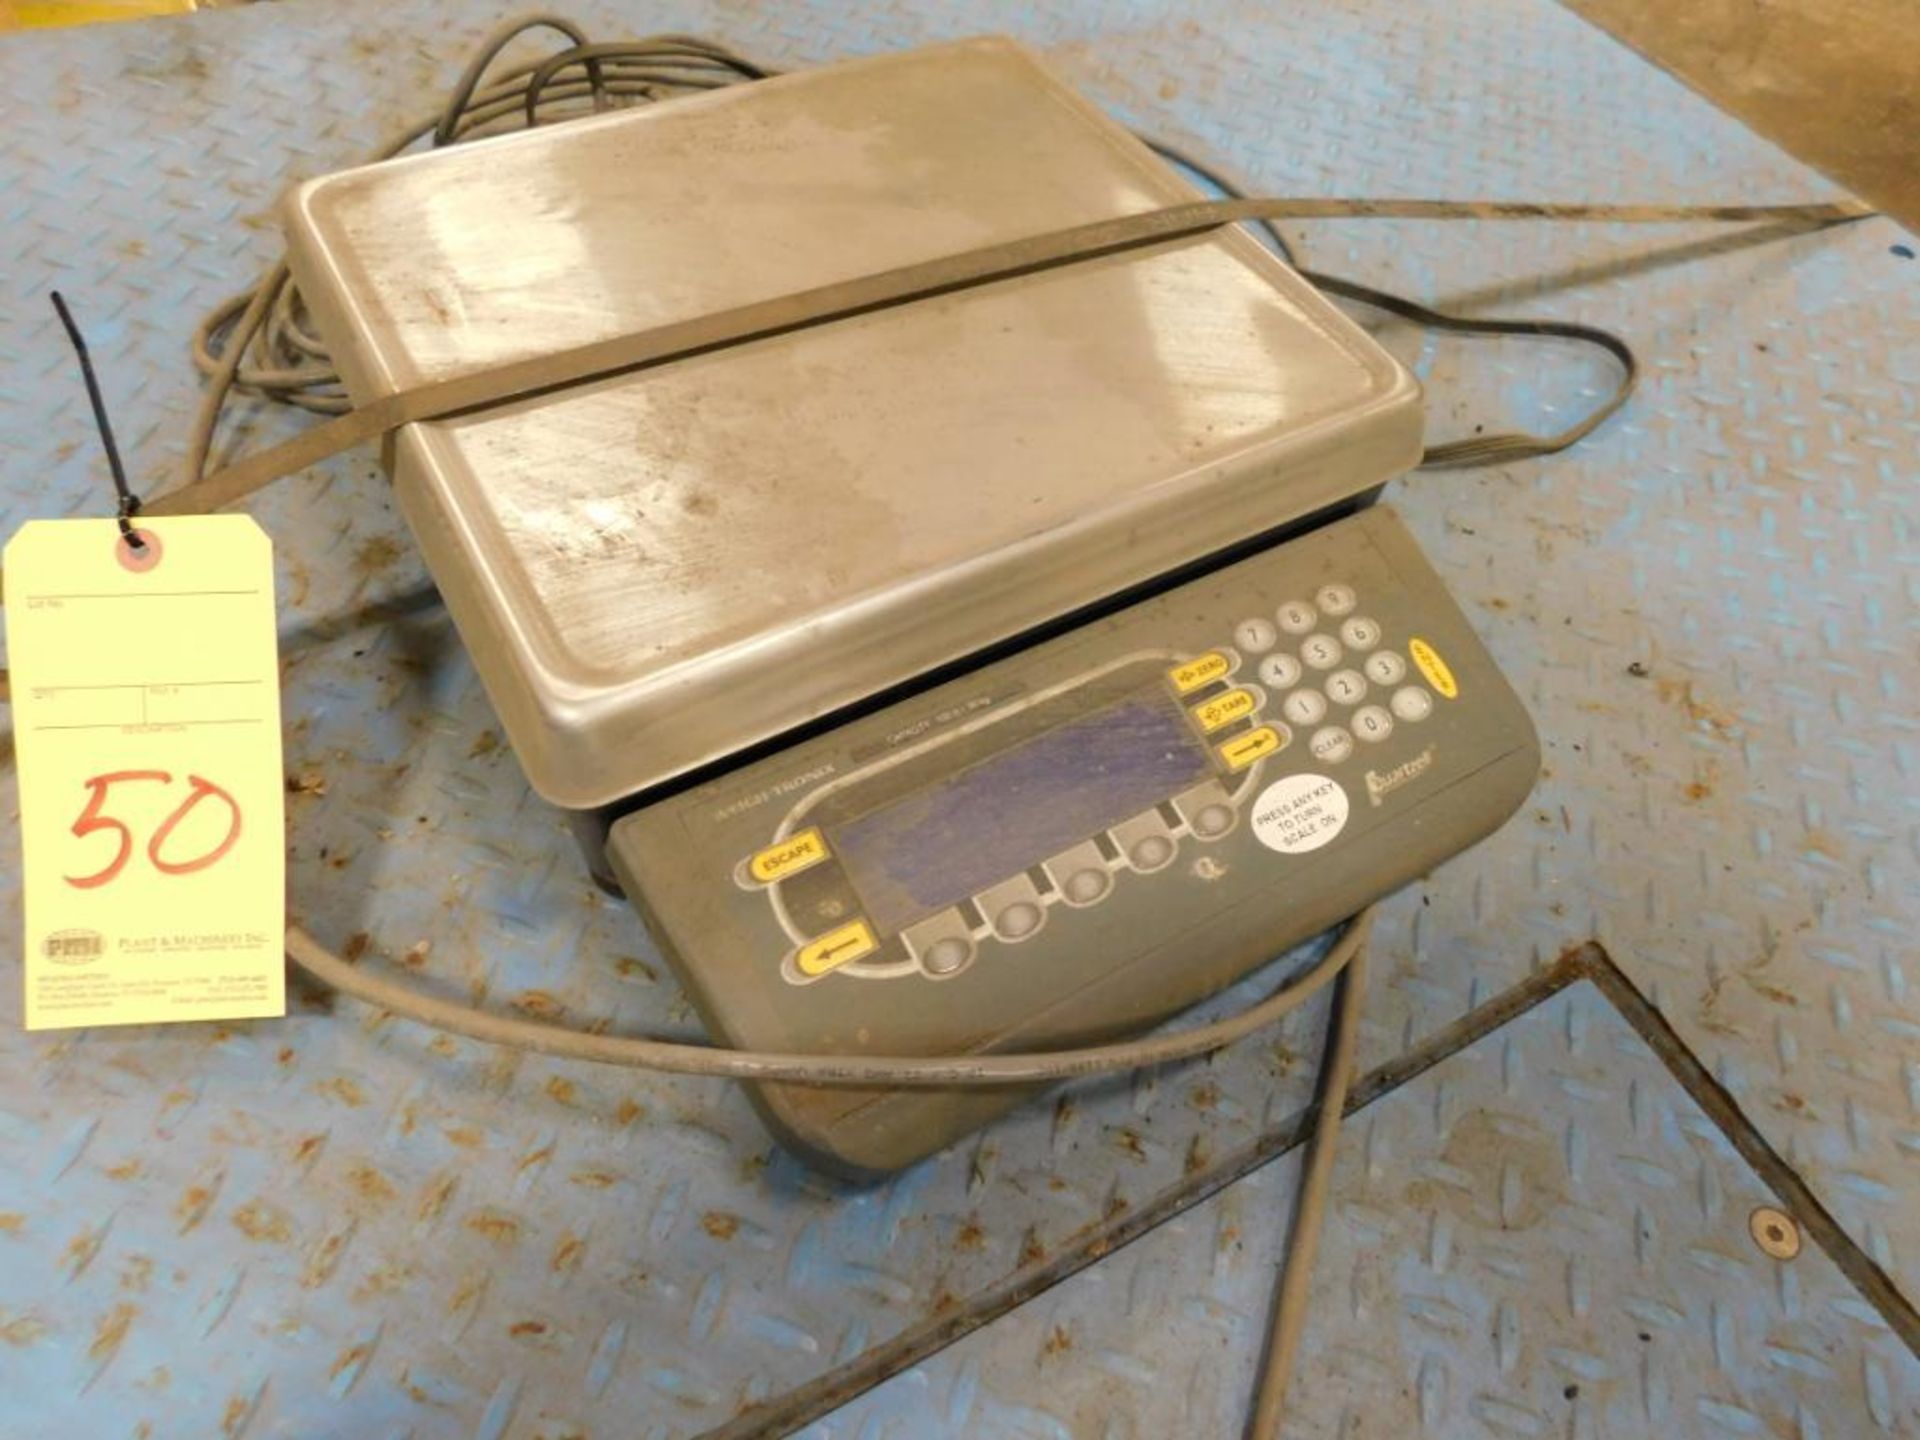 FLOOR SCALE, WEIGHTRONIX, 500 lb. cap., 60" x 48", w/D.R.O. - Image 2 of 2